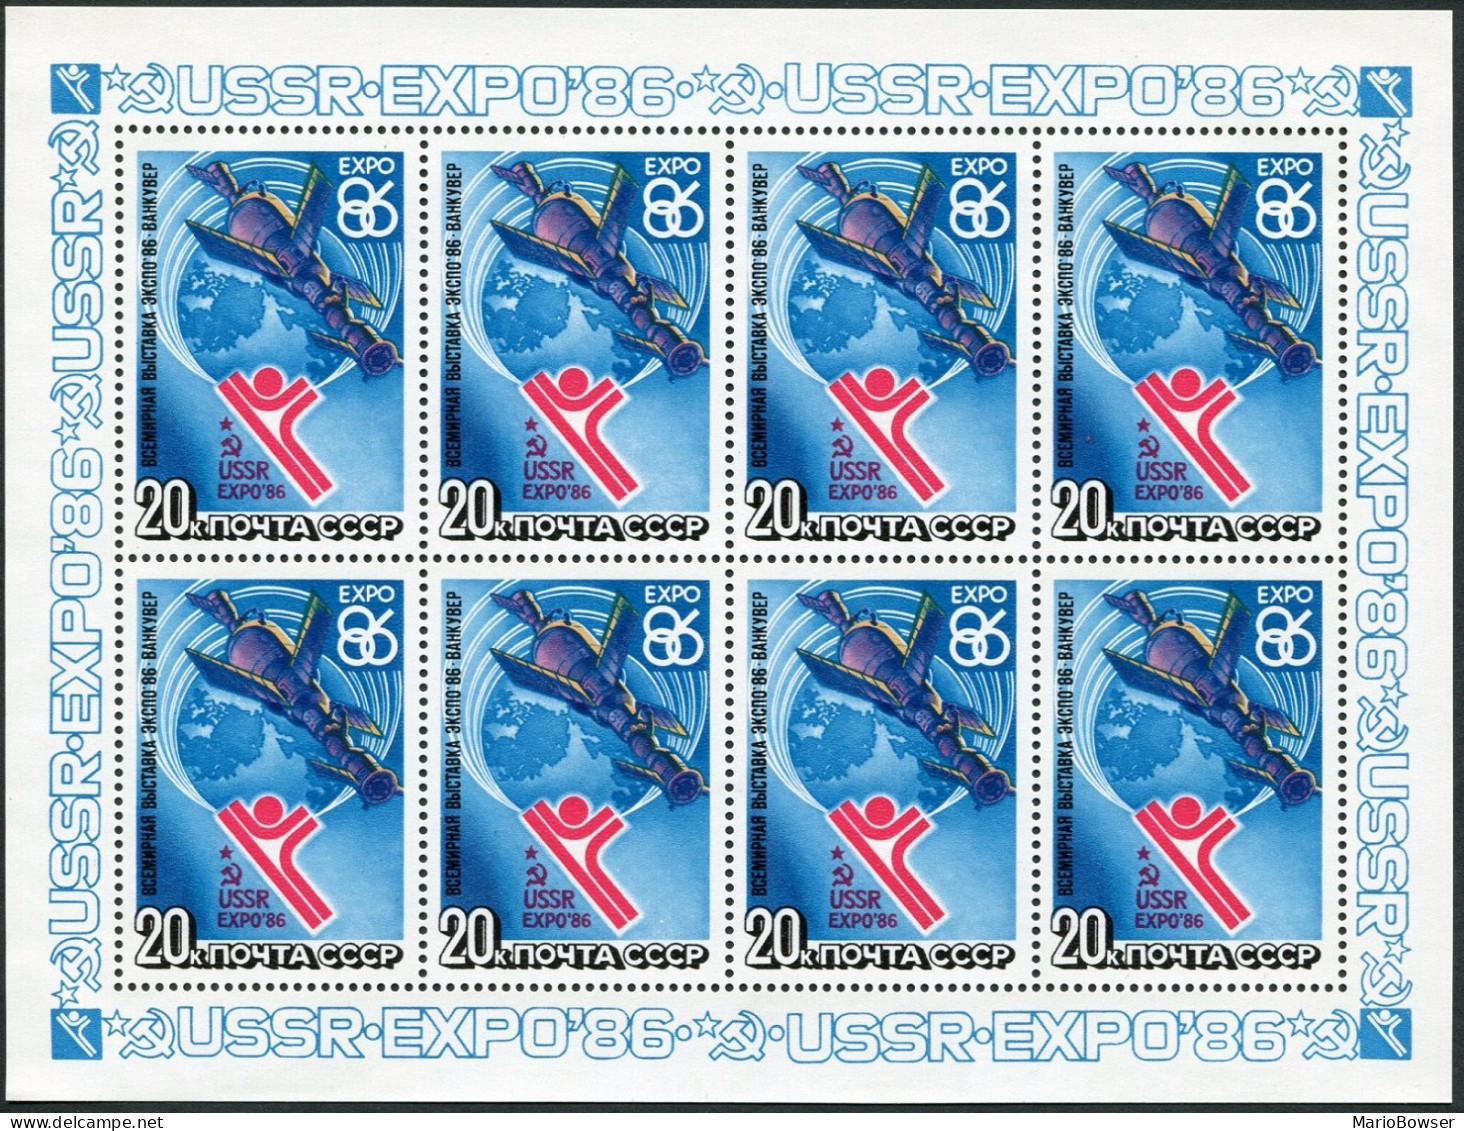 Russia 5440a Sheet, MNH. Michel 5589 Klb. EXPO-1986, Vancouver. Space Station. - Neufs